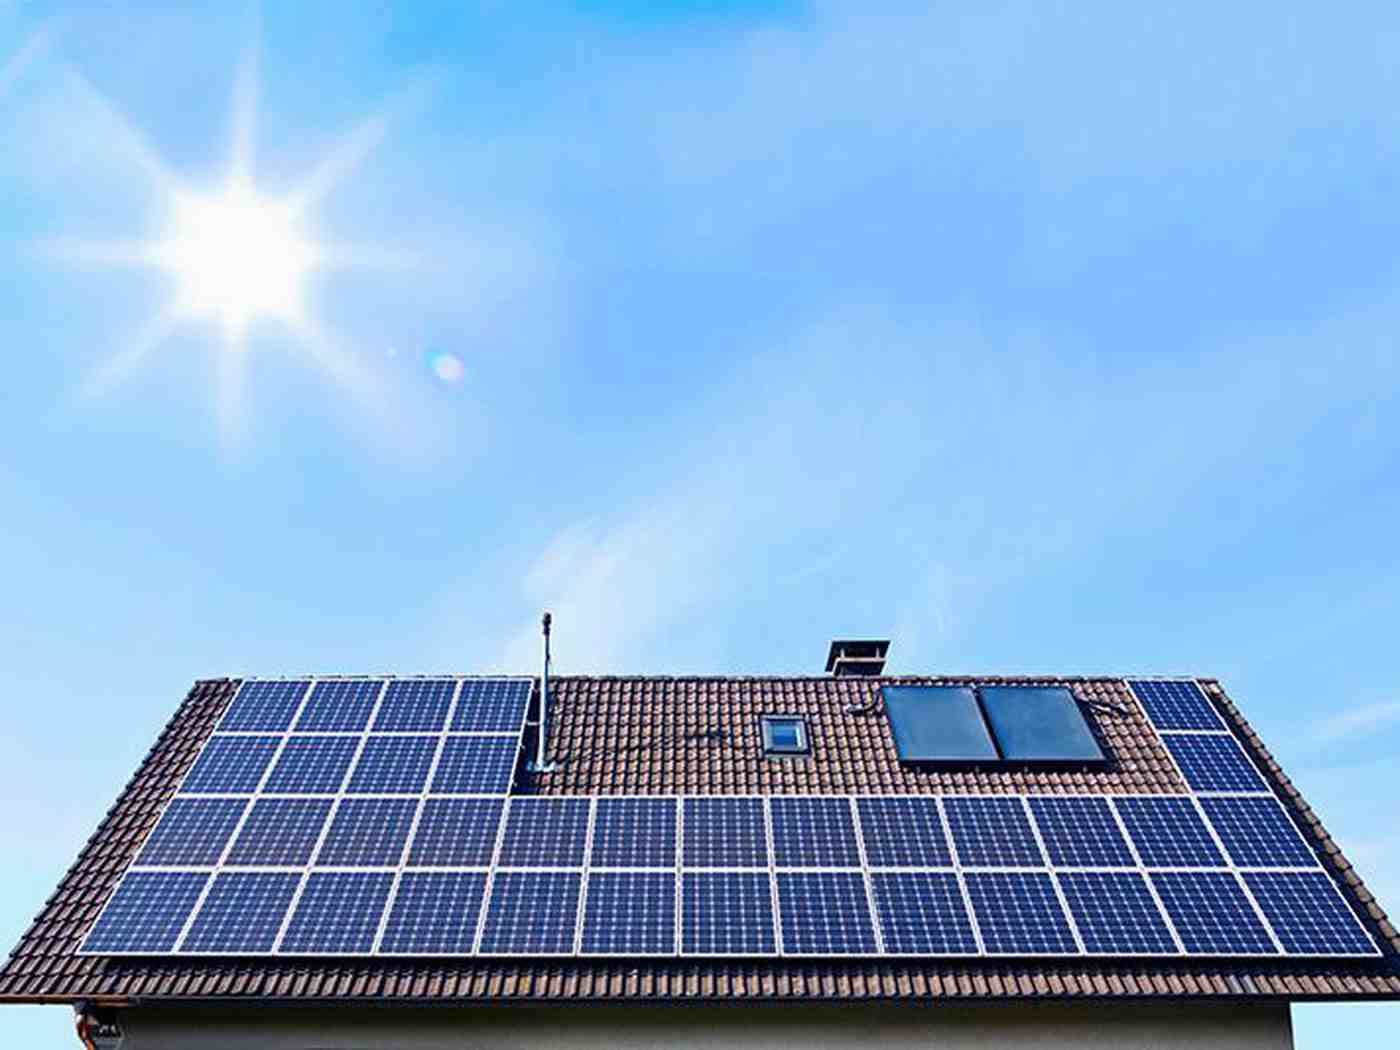 What are the social benefits of solar energy?